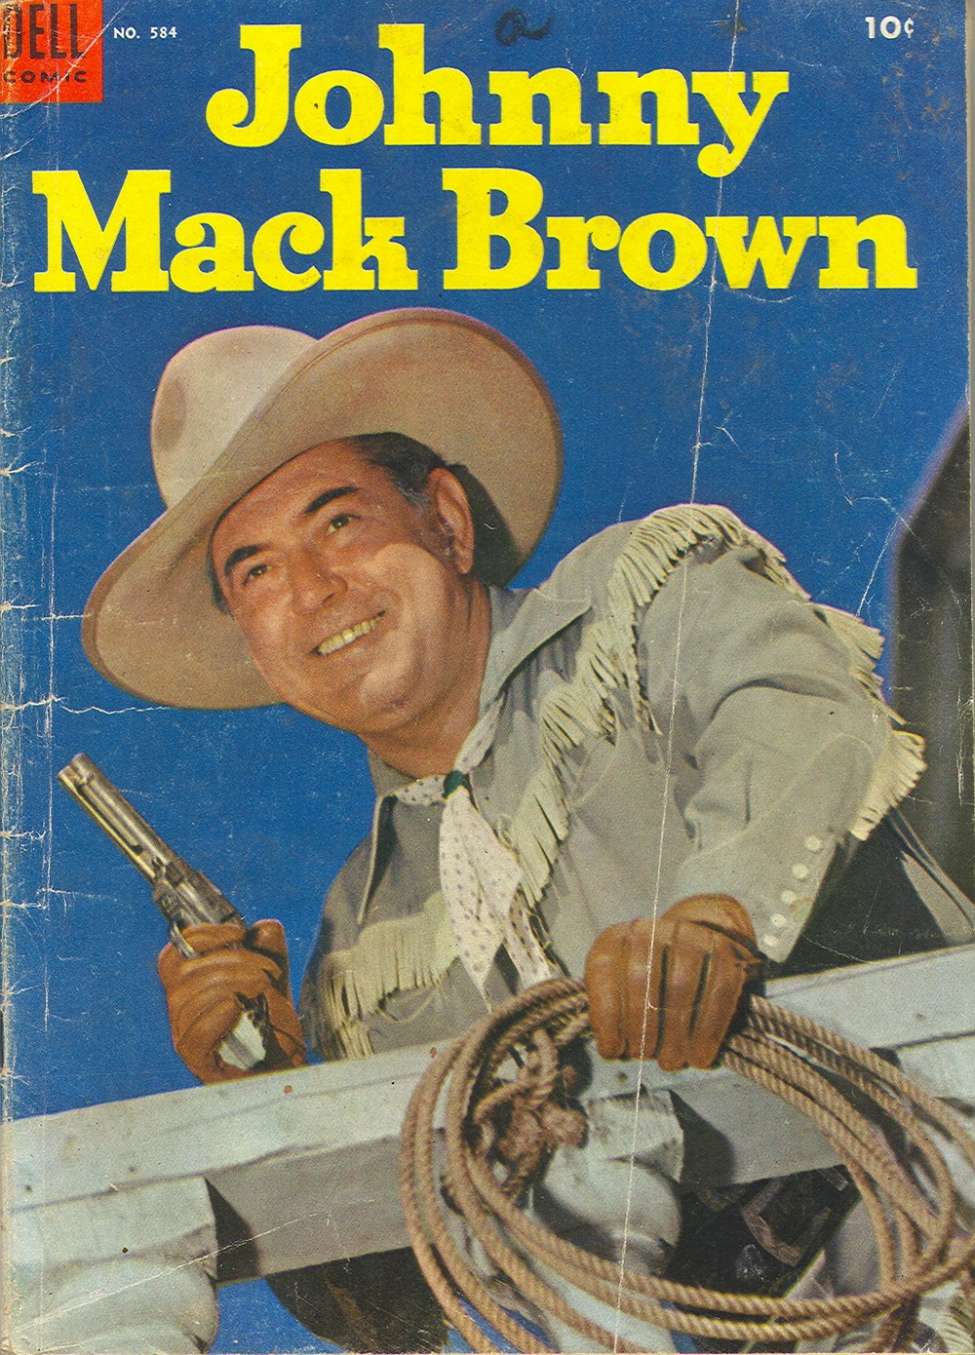 Book Cover For 0584 - Johnny Mack Brown